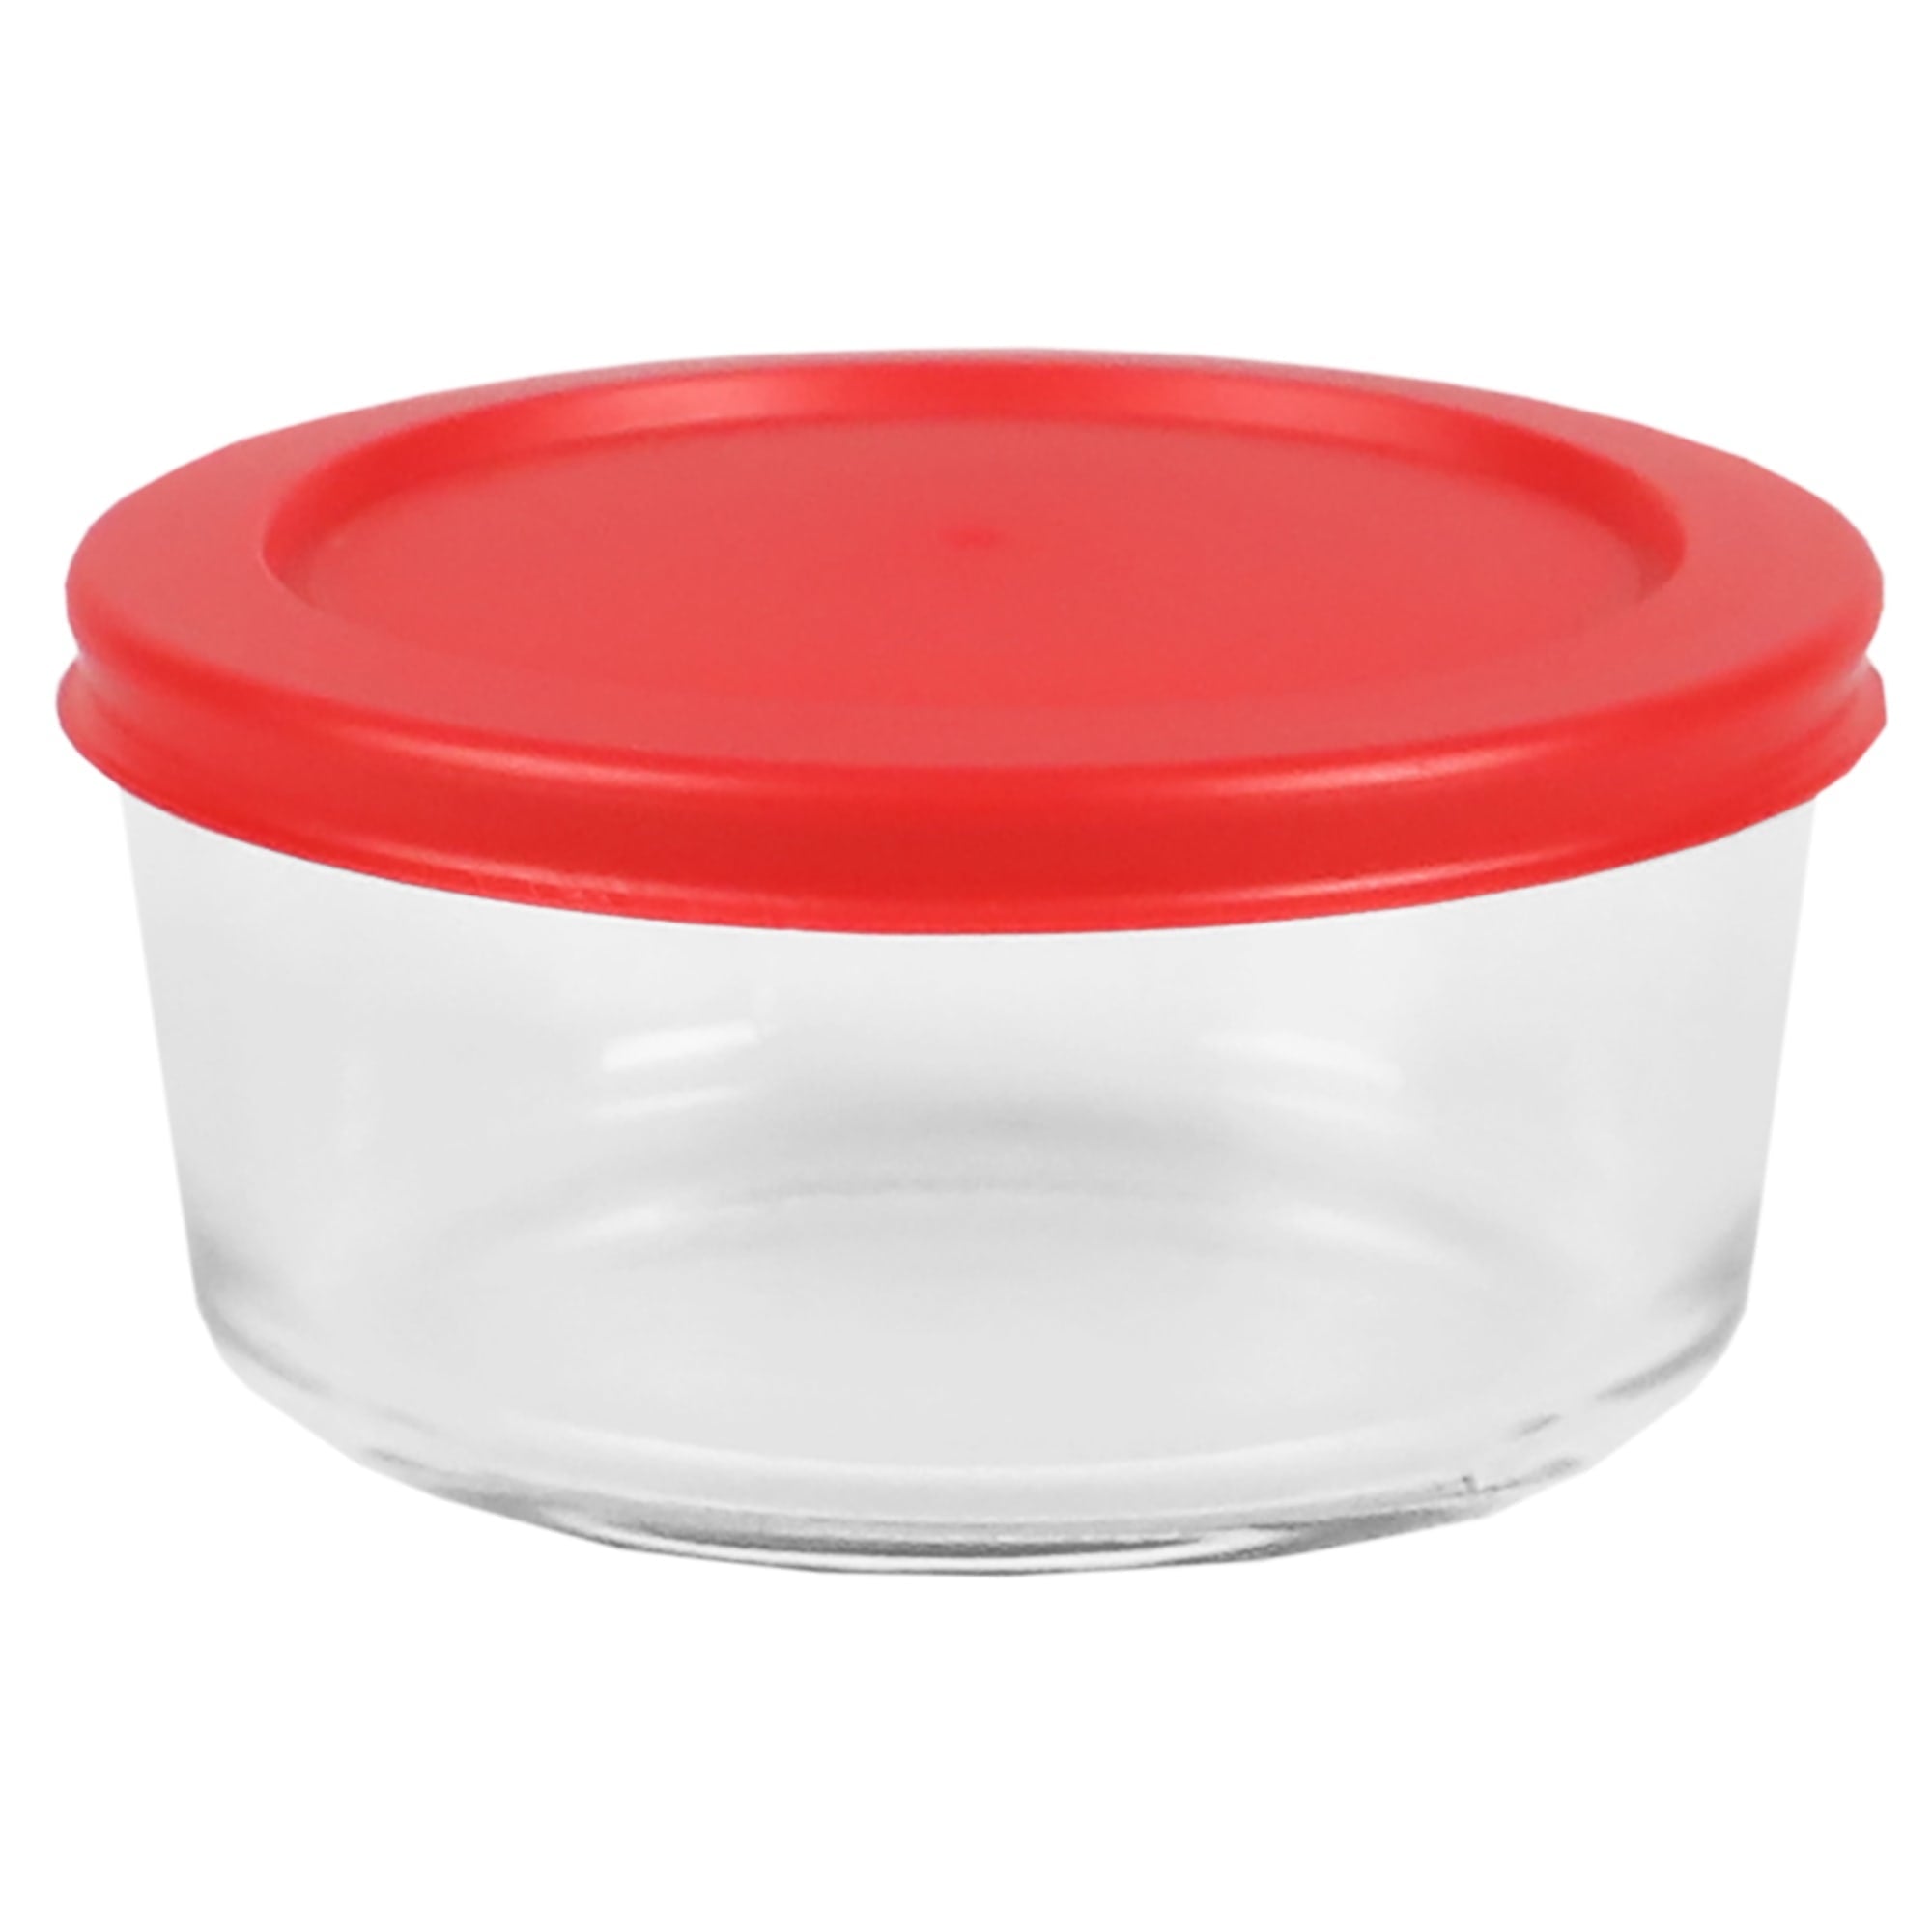 Home Basics 16 oz. Round Glass Food Storage Container with Red Lid, Clear $3.00 EACH, CASE PACK OF 12